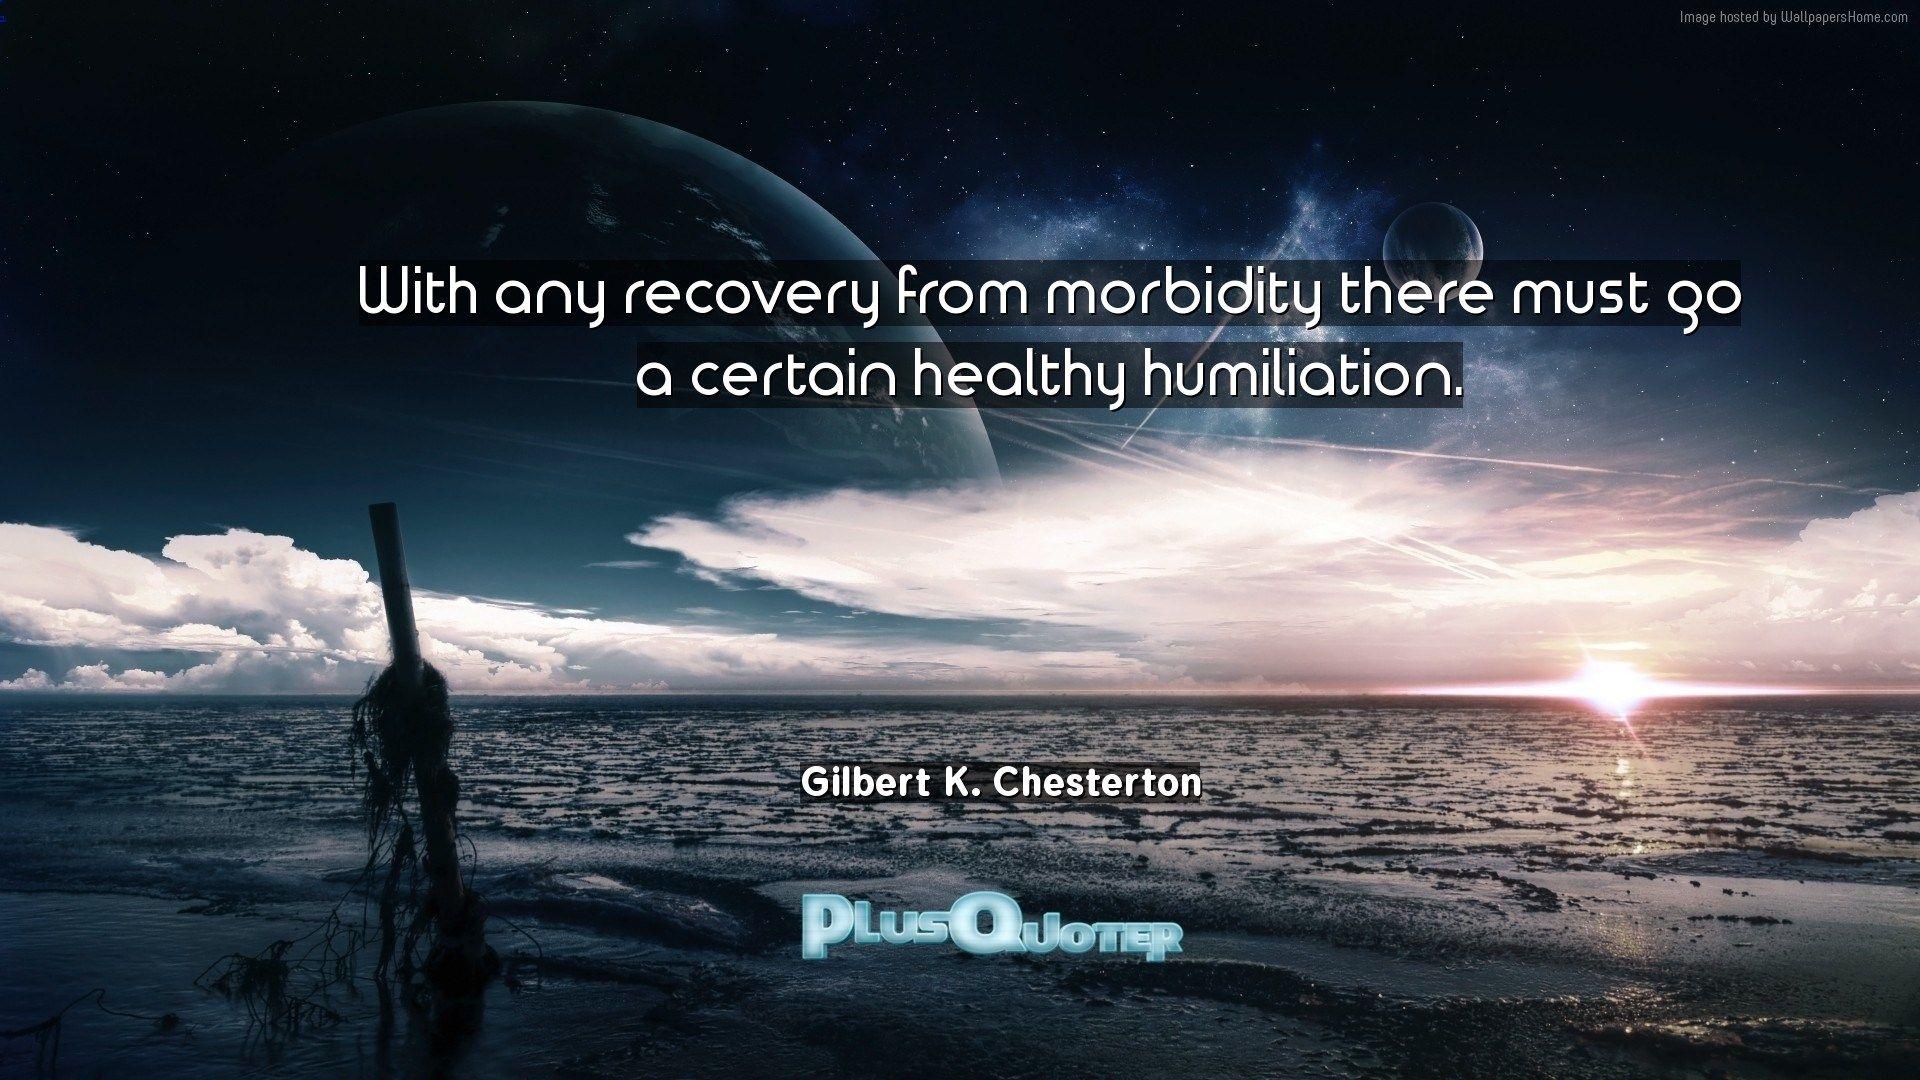 With any recovery from morbidity there must go a certain healthy